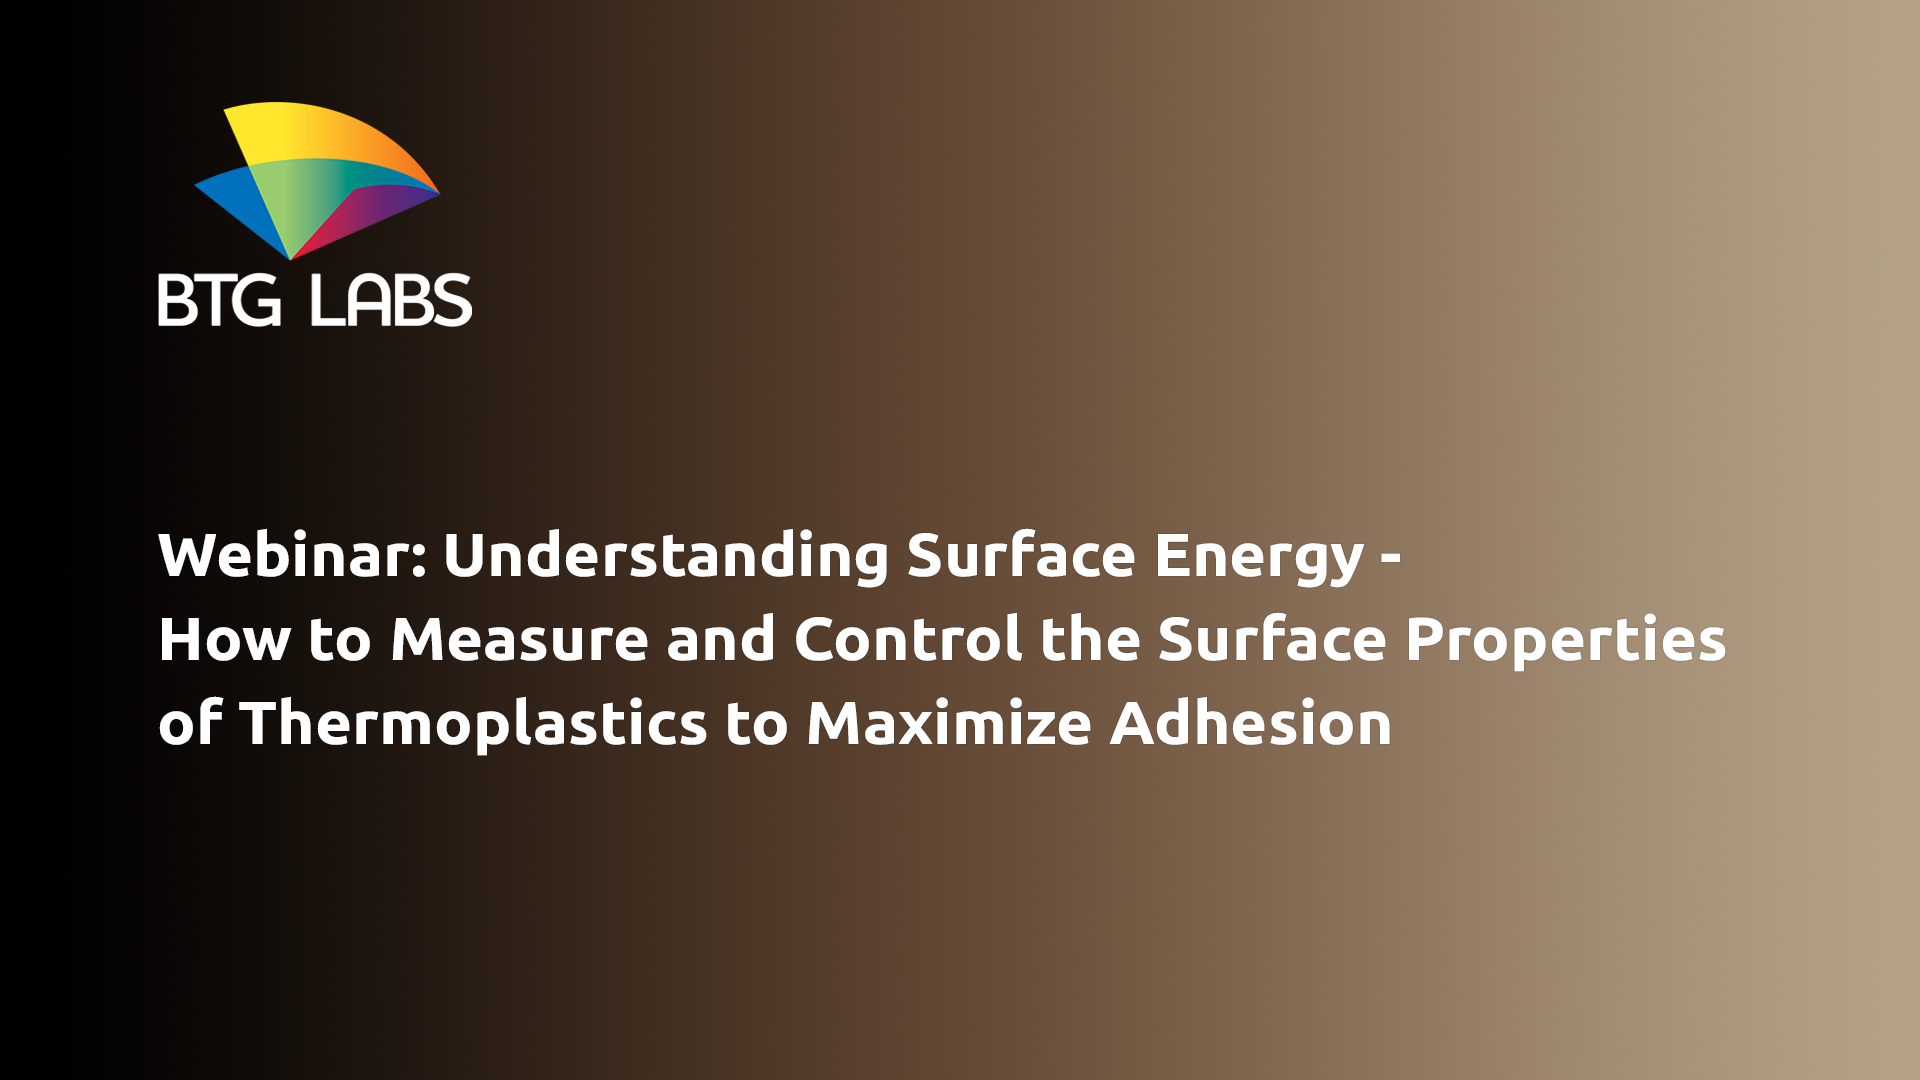 Webinar: How to Control the Surface Properties of Thermoplastics to Maximize Adhesion